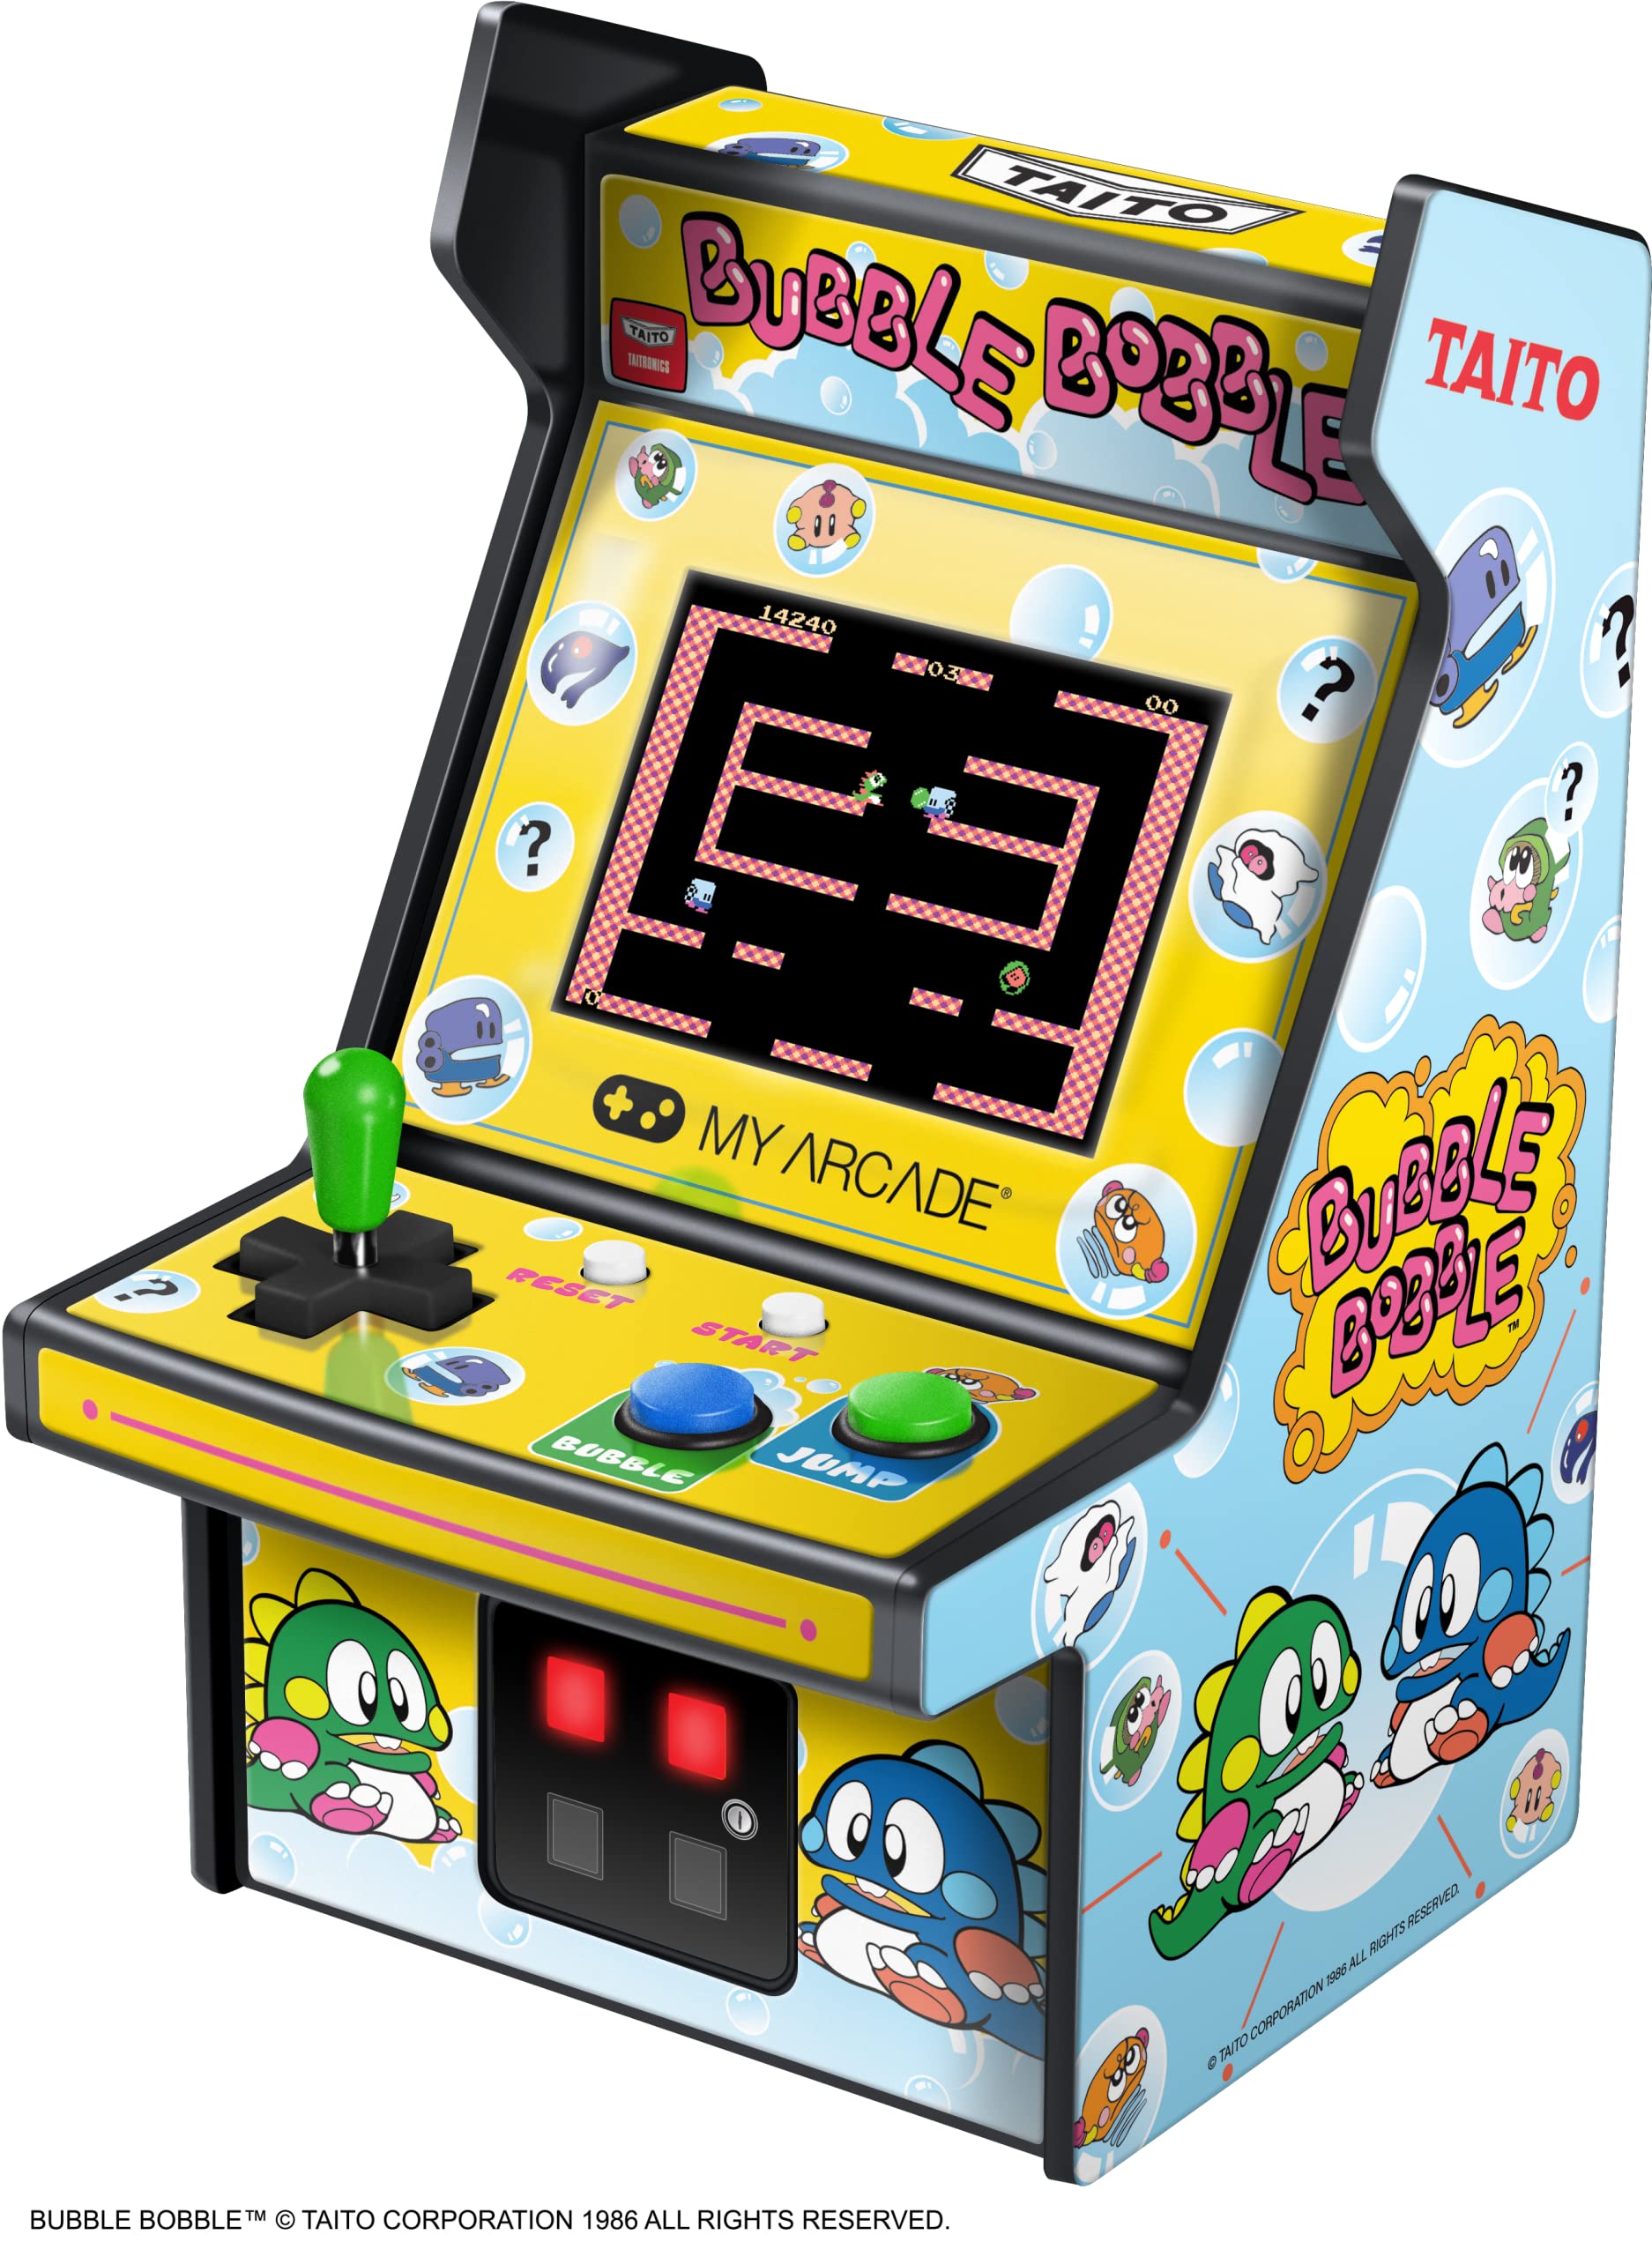 My Arcade Micro Player Mini Arcade Machine: Bubble Bobble Video Game, Fully Playable, 6.75 Inch Collectible, Color Display & Micro Player Mini Arcade Machine: Pac-Man Video Game, 6.75 Inch Collectible